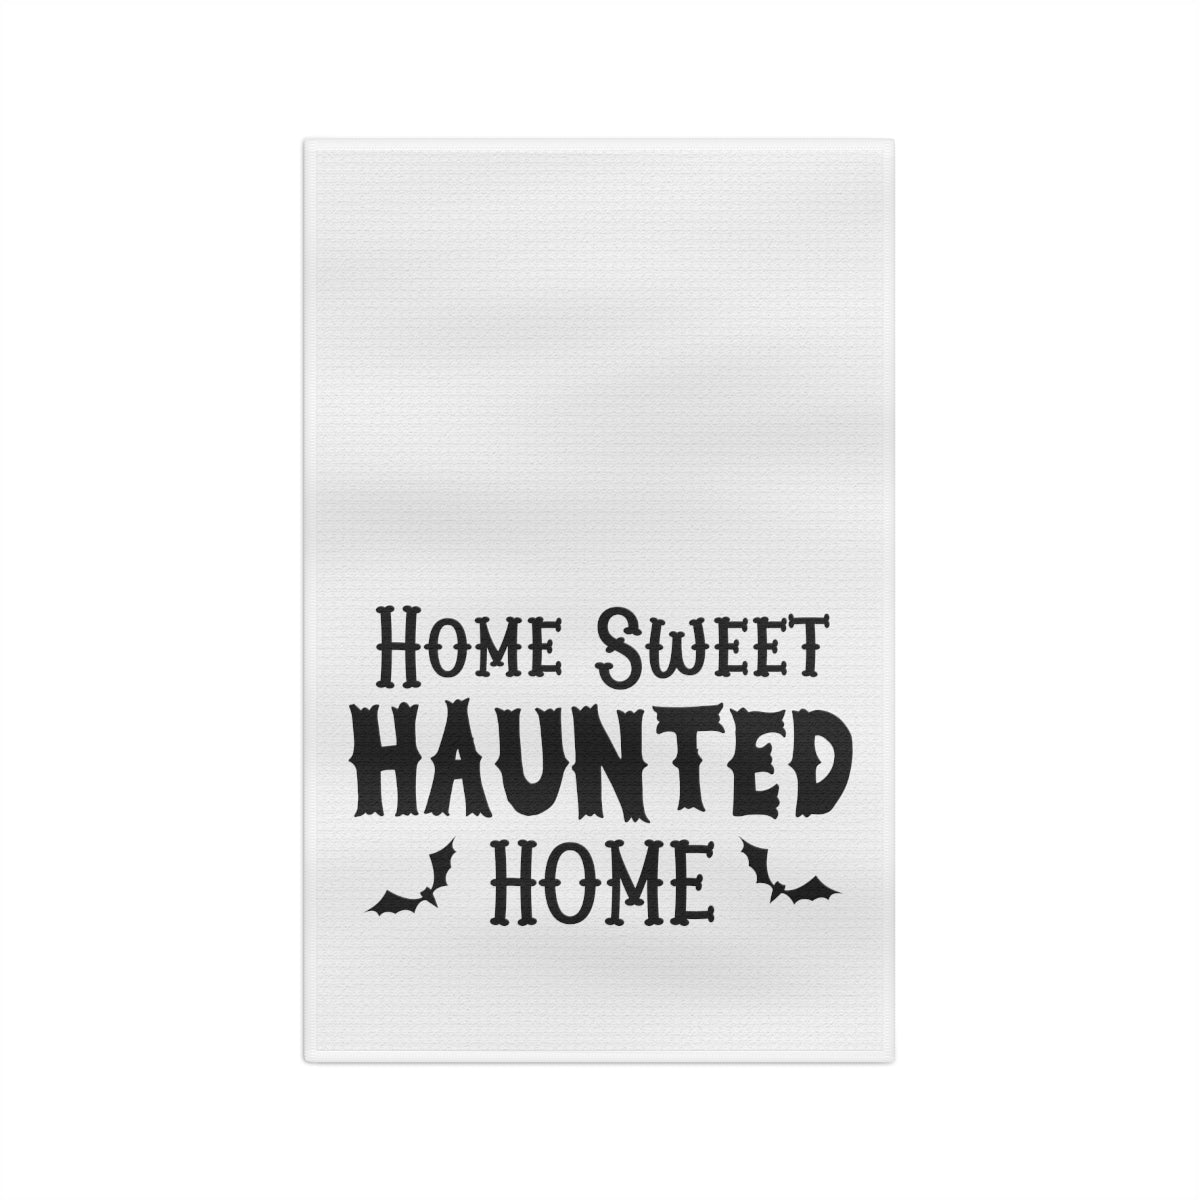 Home Sweet Haunted Home Tea Towel - Witchy Kitchens